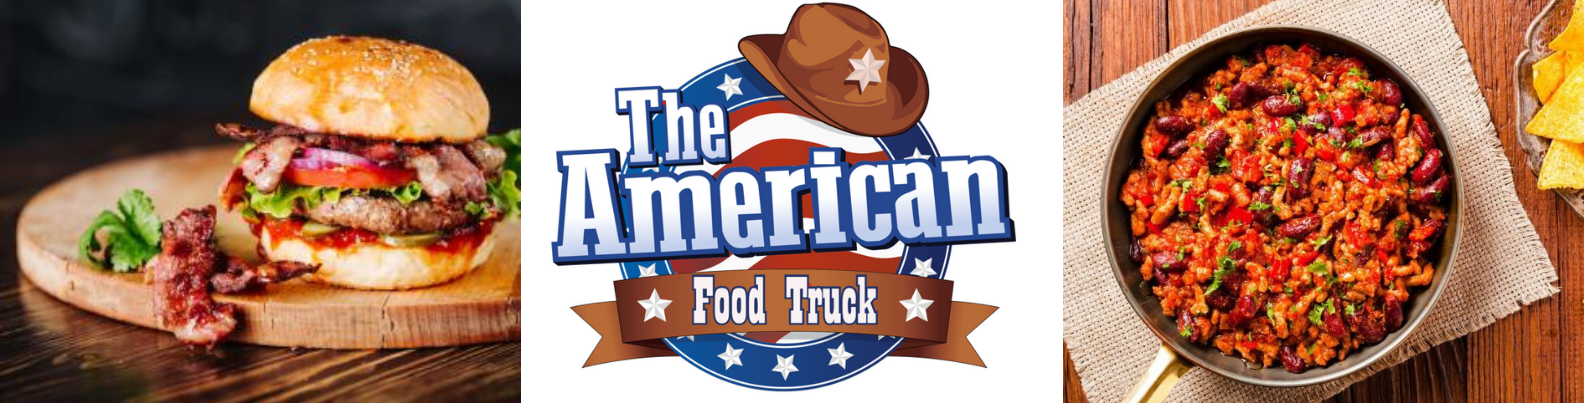 kwakoo-event-couverture-the-american-food-truck